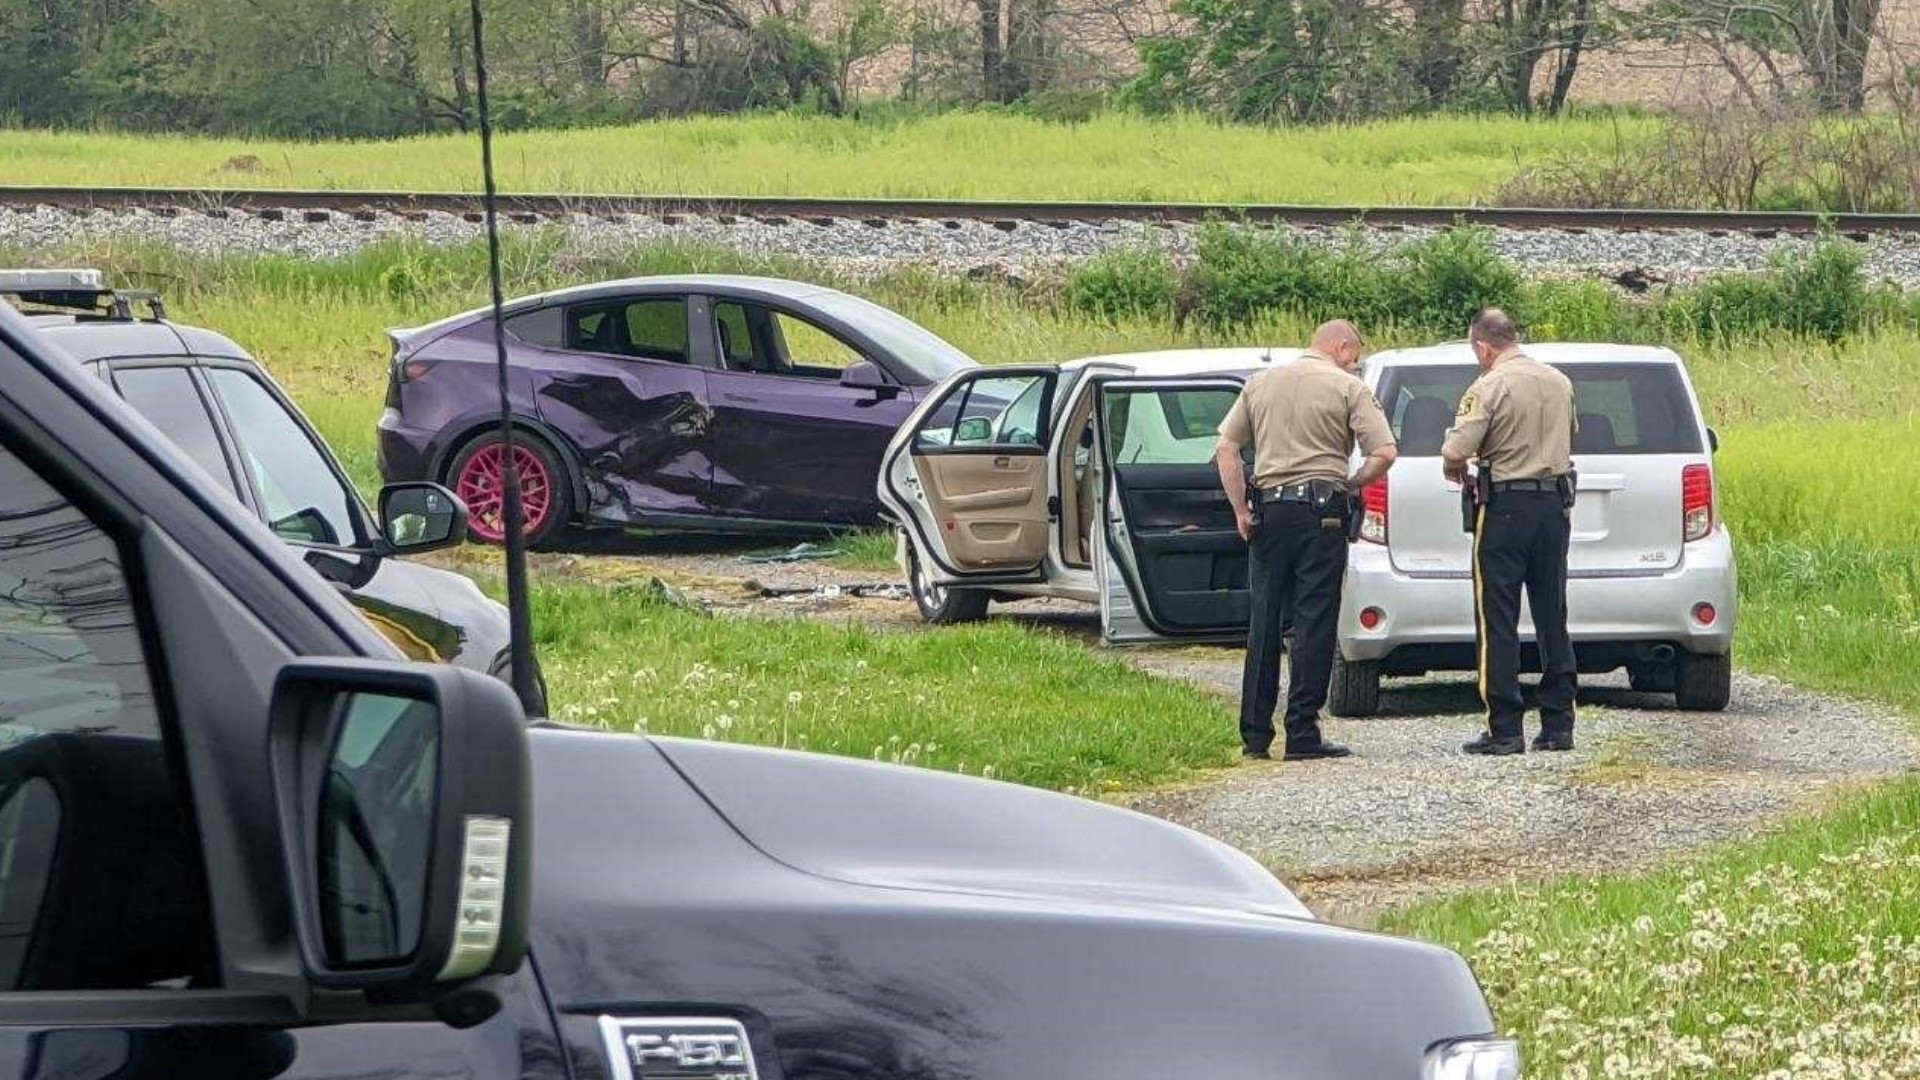 Police say an argument between two men  escalated Monday morning following a crash and shooting in Heidelberg Township.